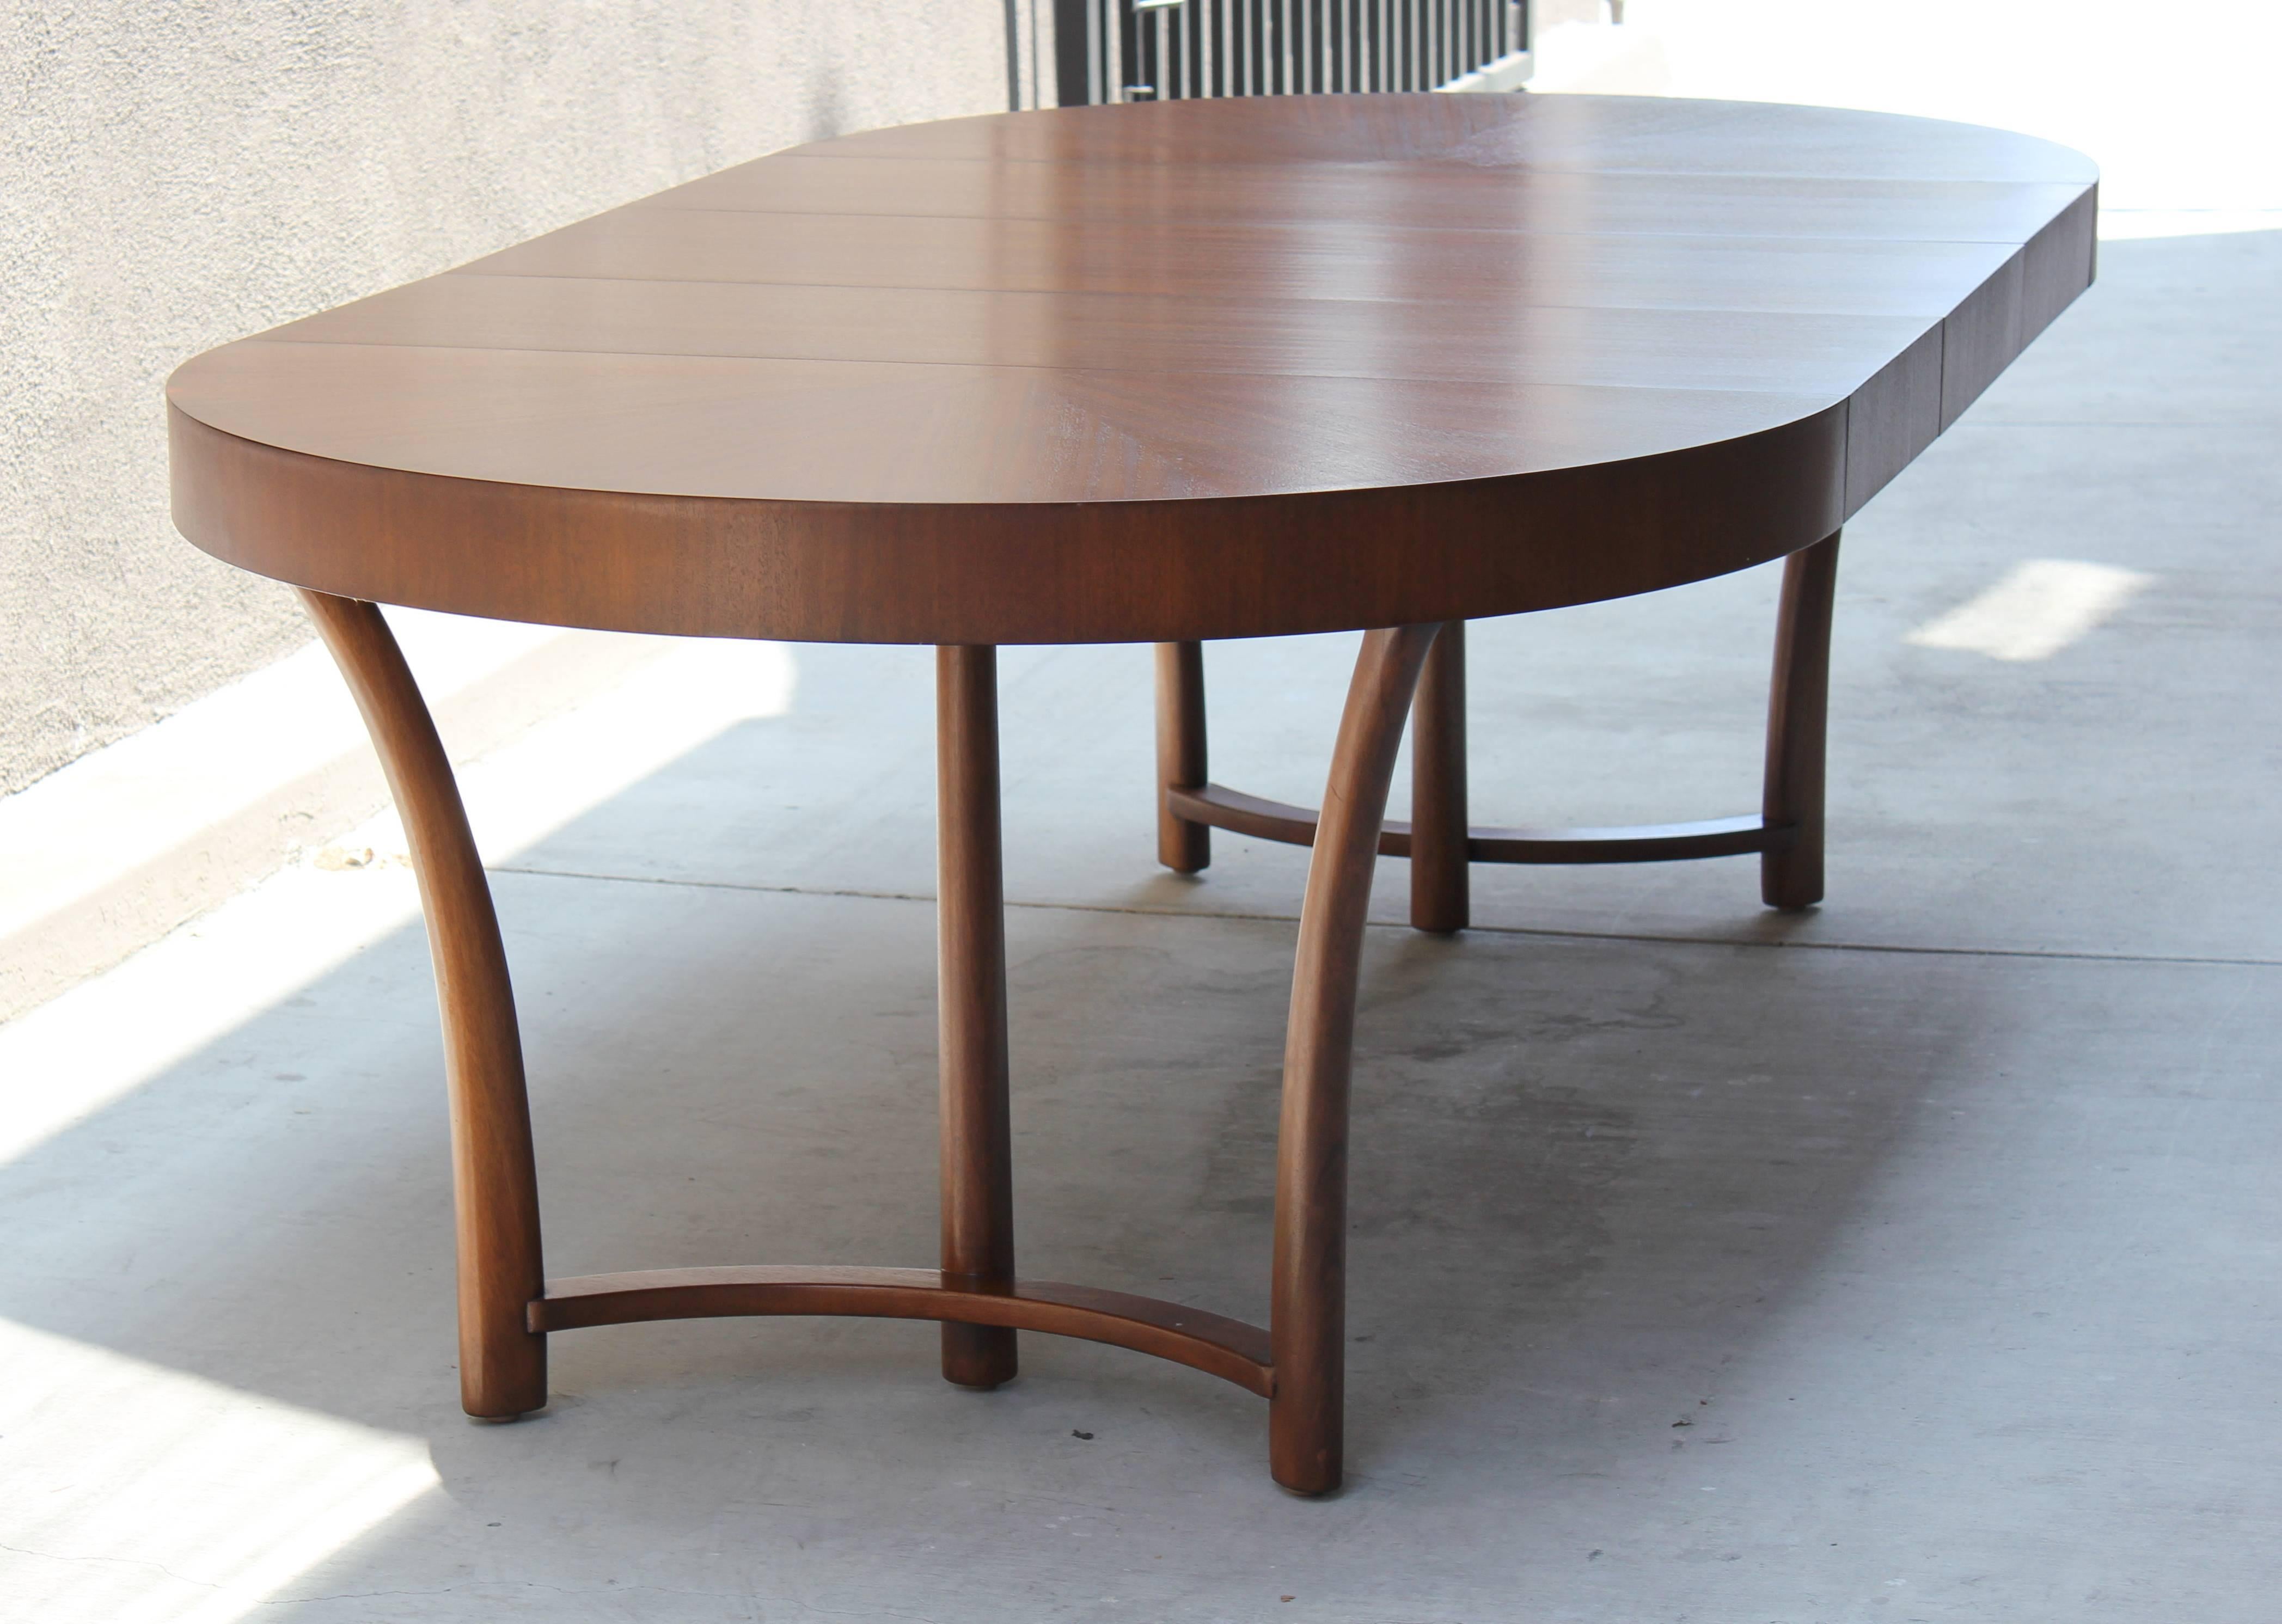 American T.H. Robsjohn-Gibbings Style Dining Table By Widdicomb, circa 1938 For Sale